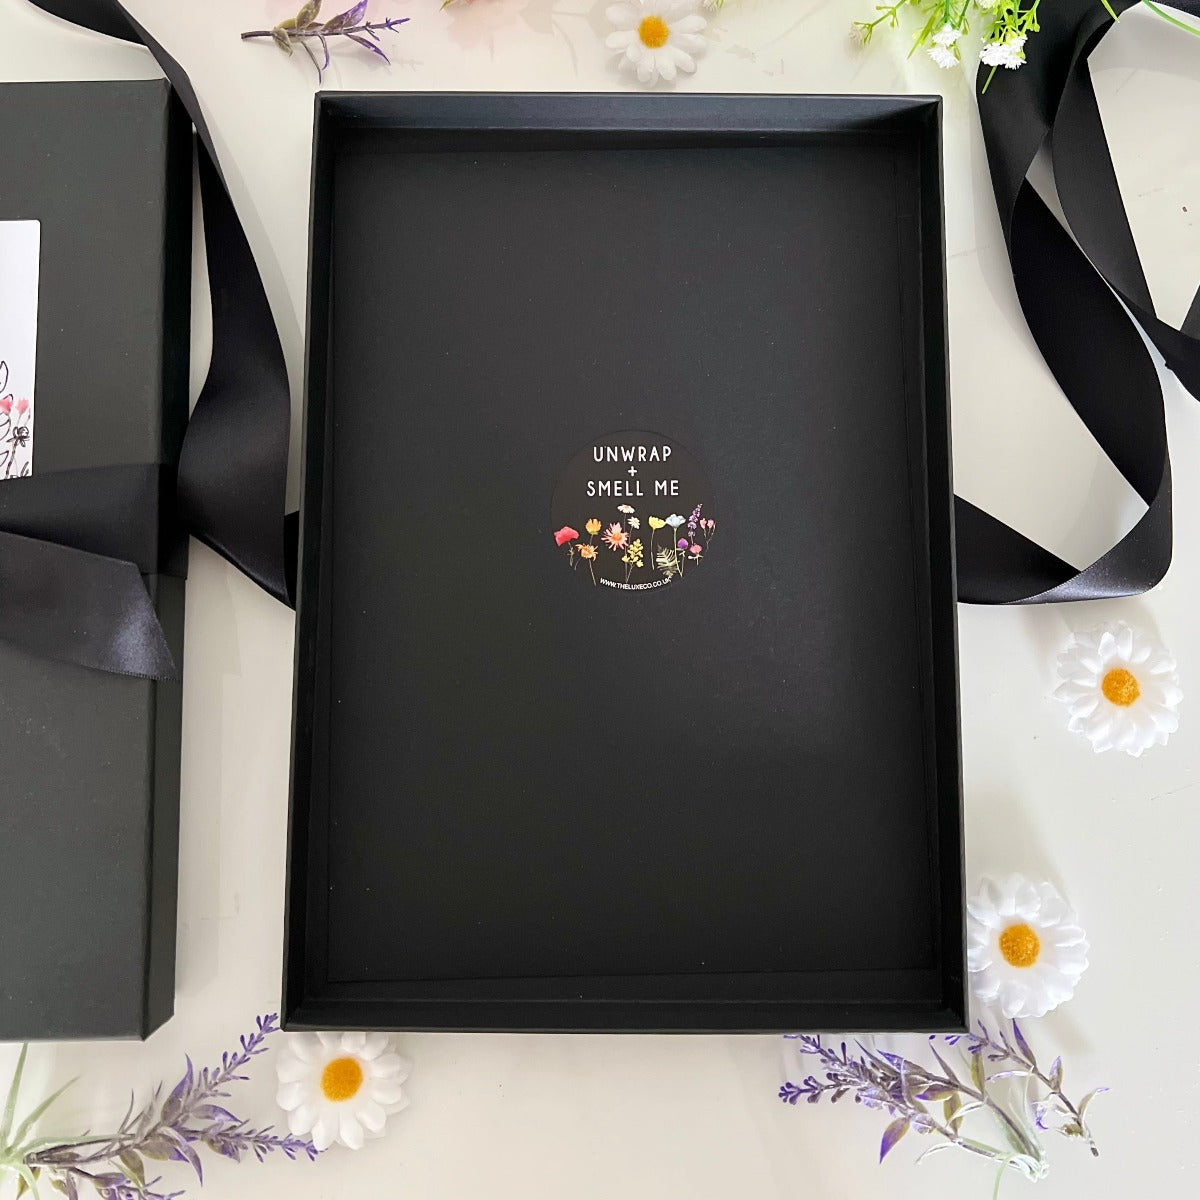 40th birthday cards come boxed in black luxury gift box | The Luxe Co